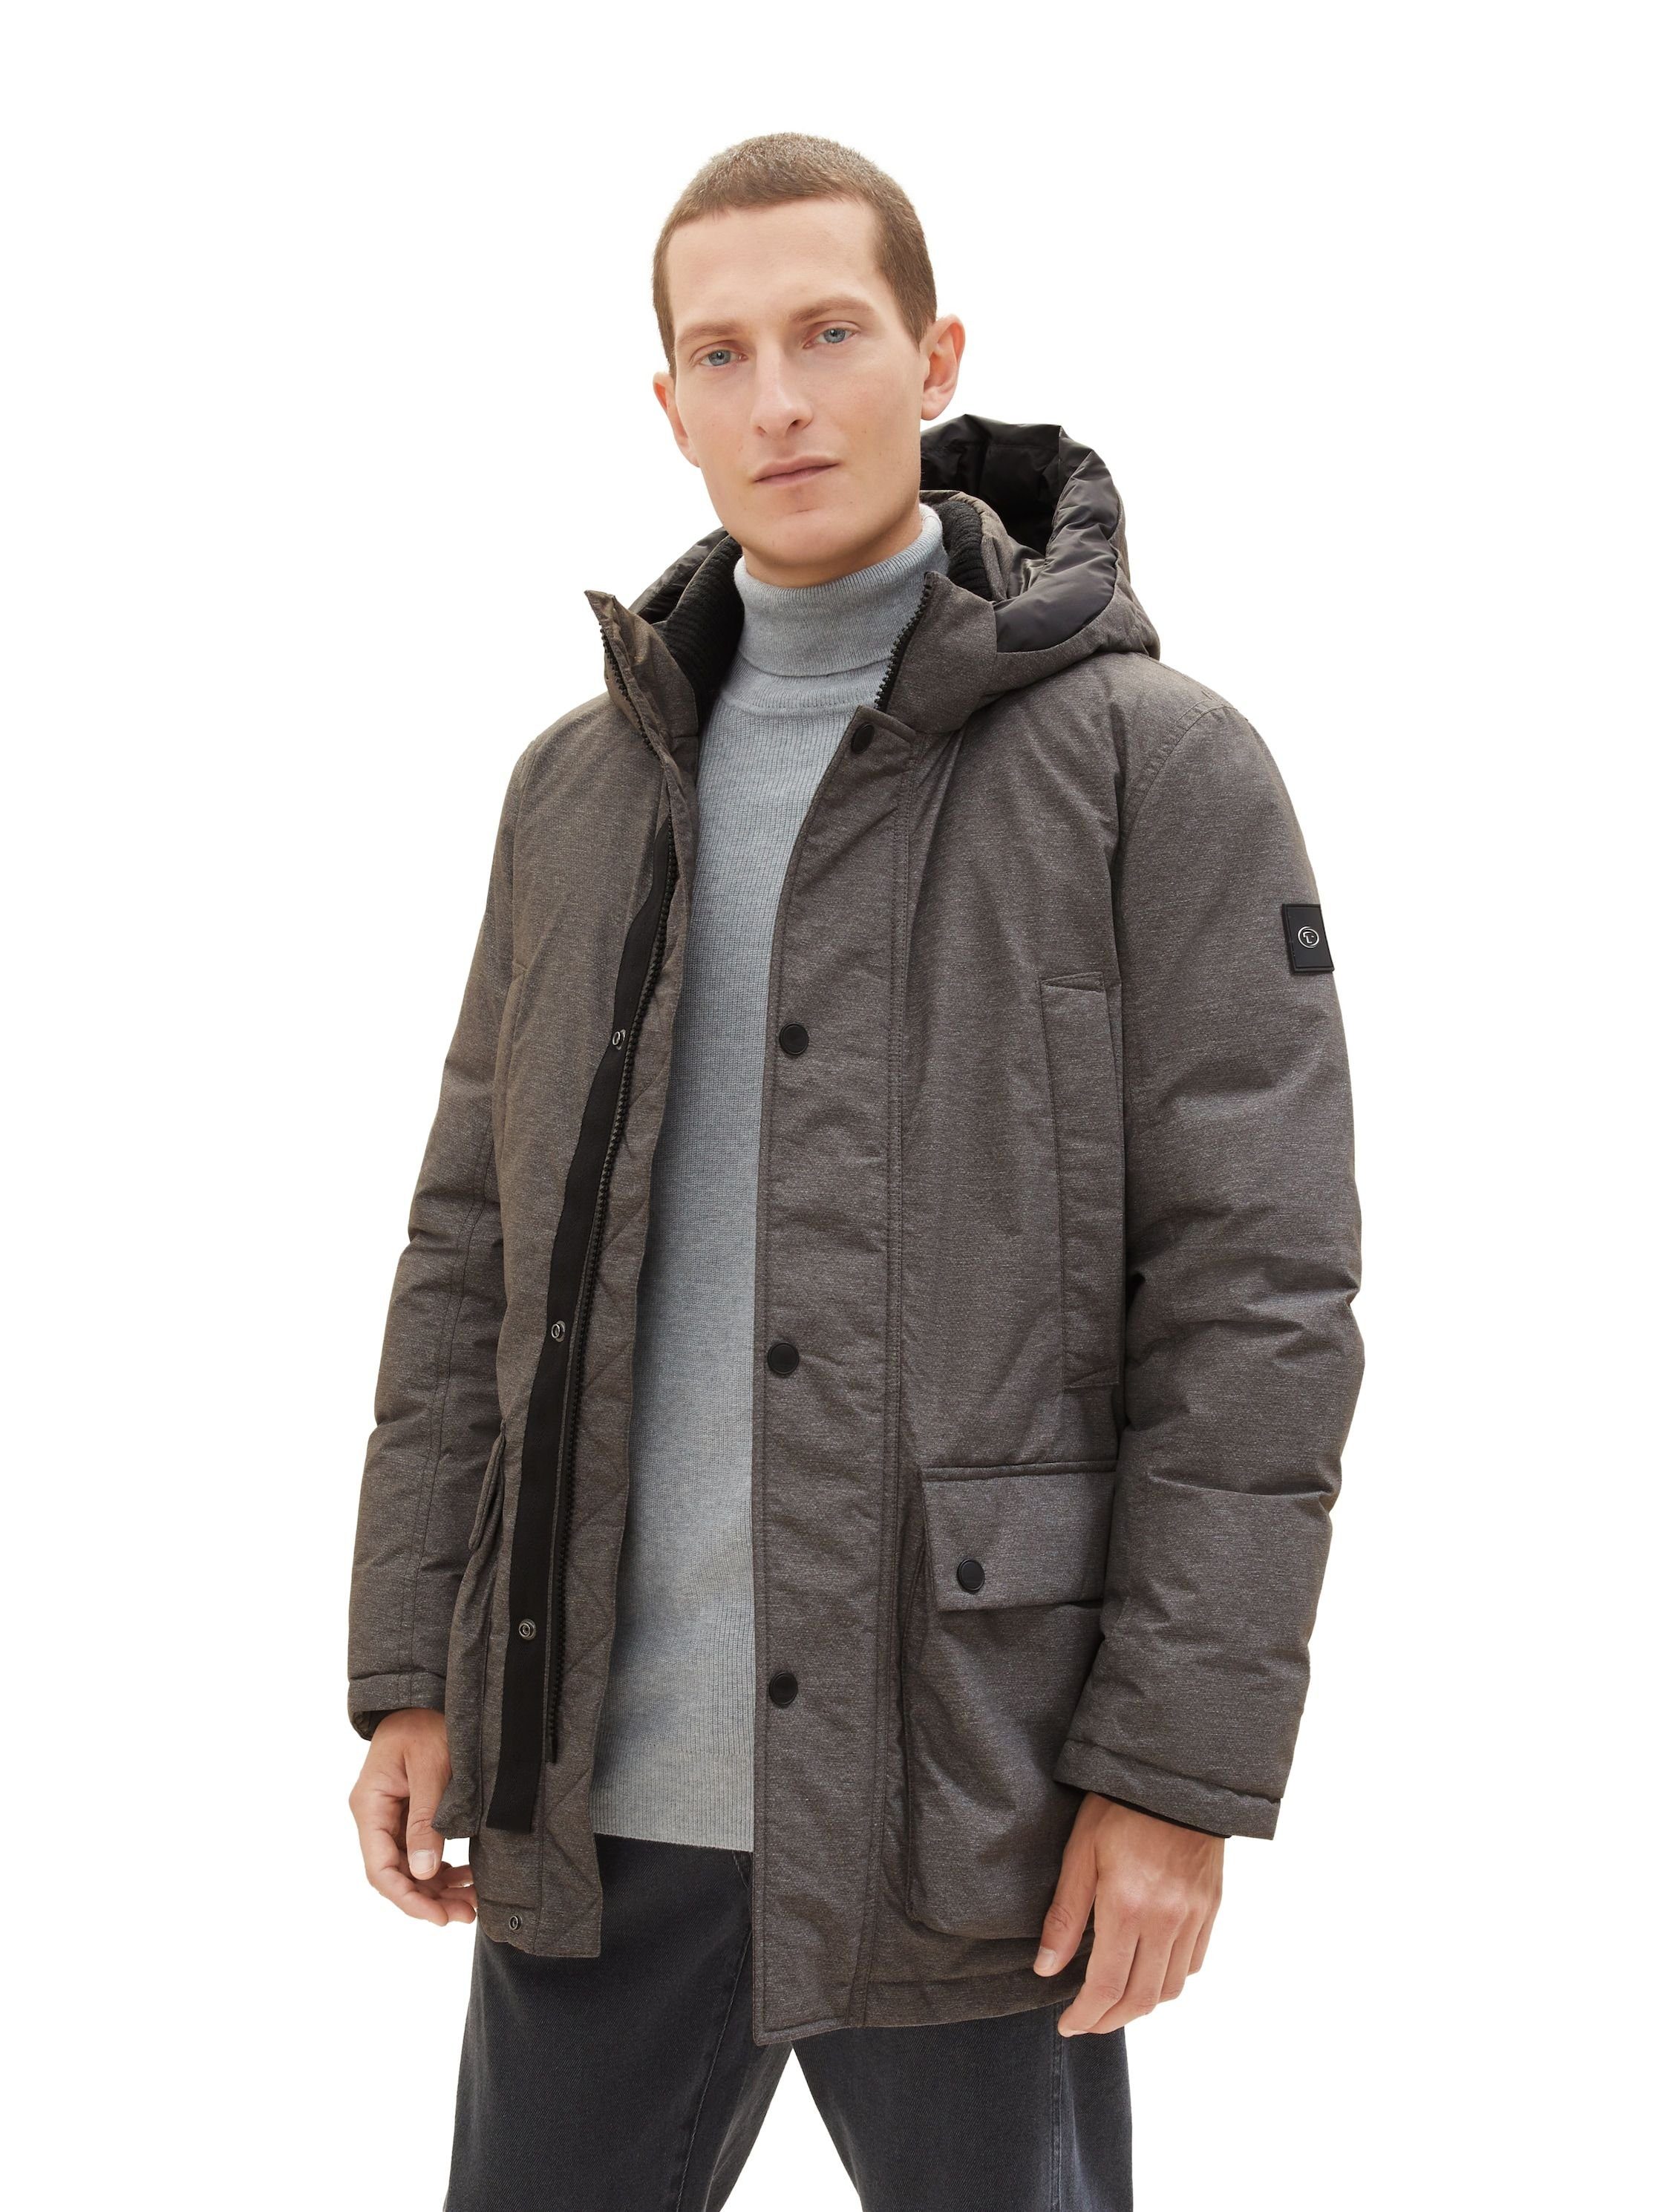 structure grey TOM TAILOR Outdoorjacke puffer